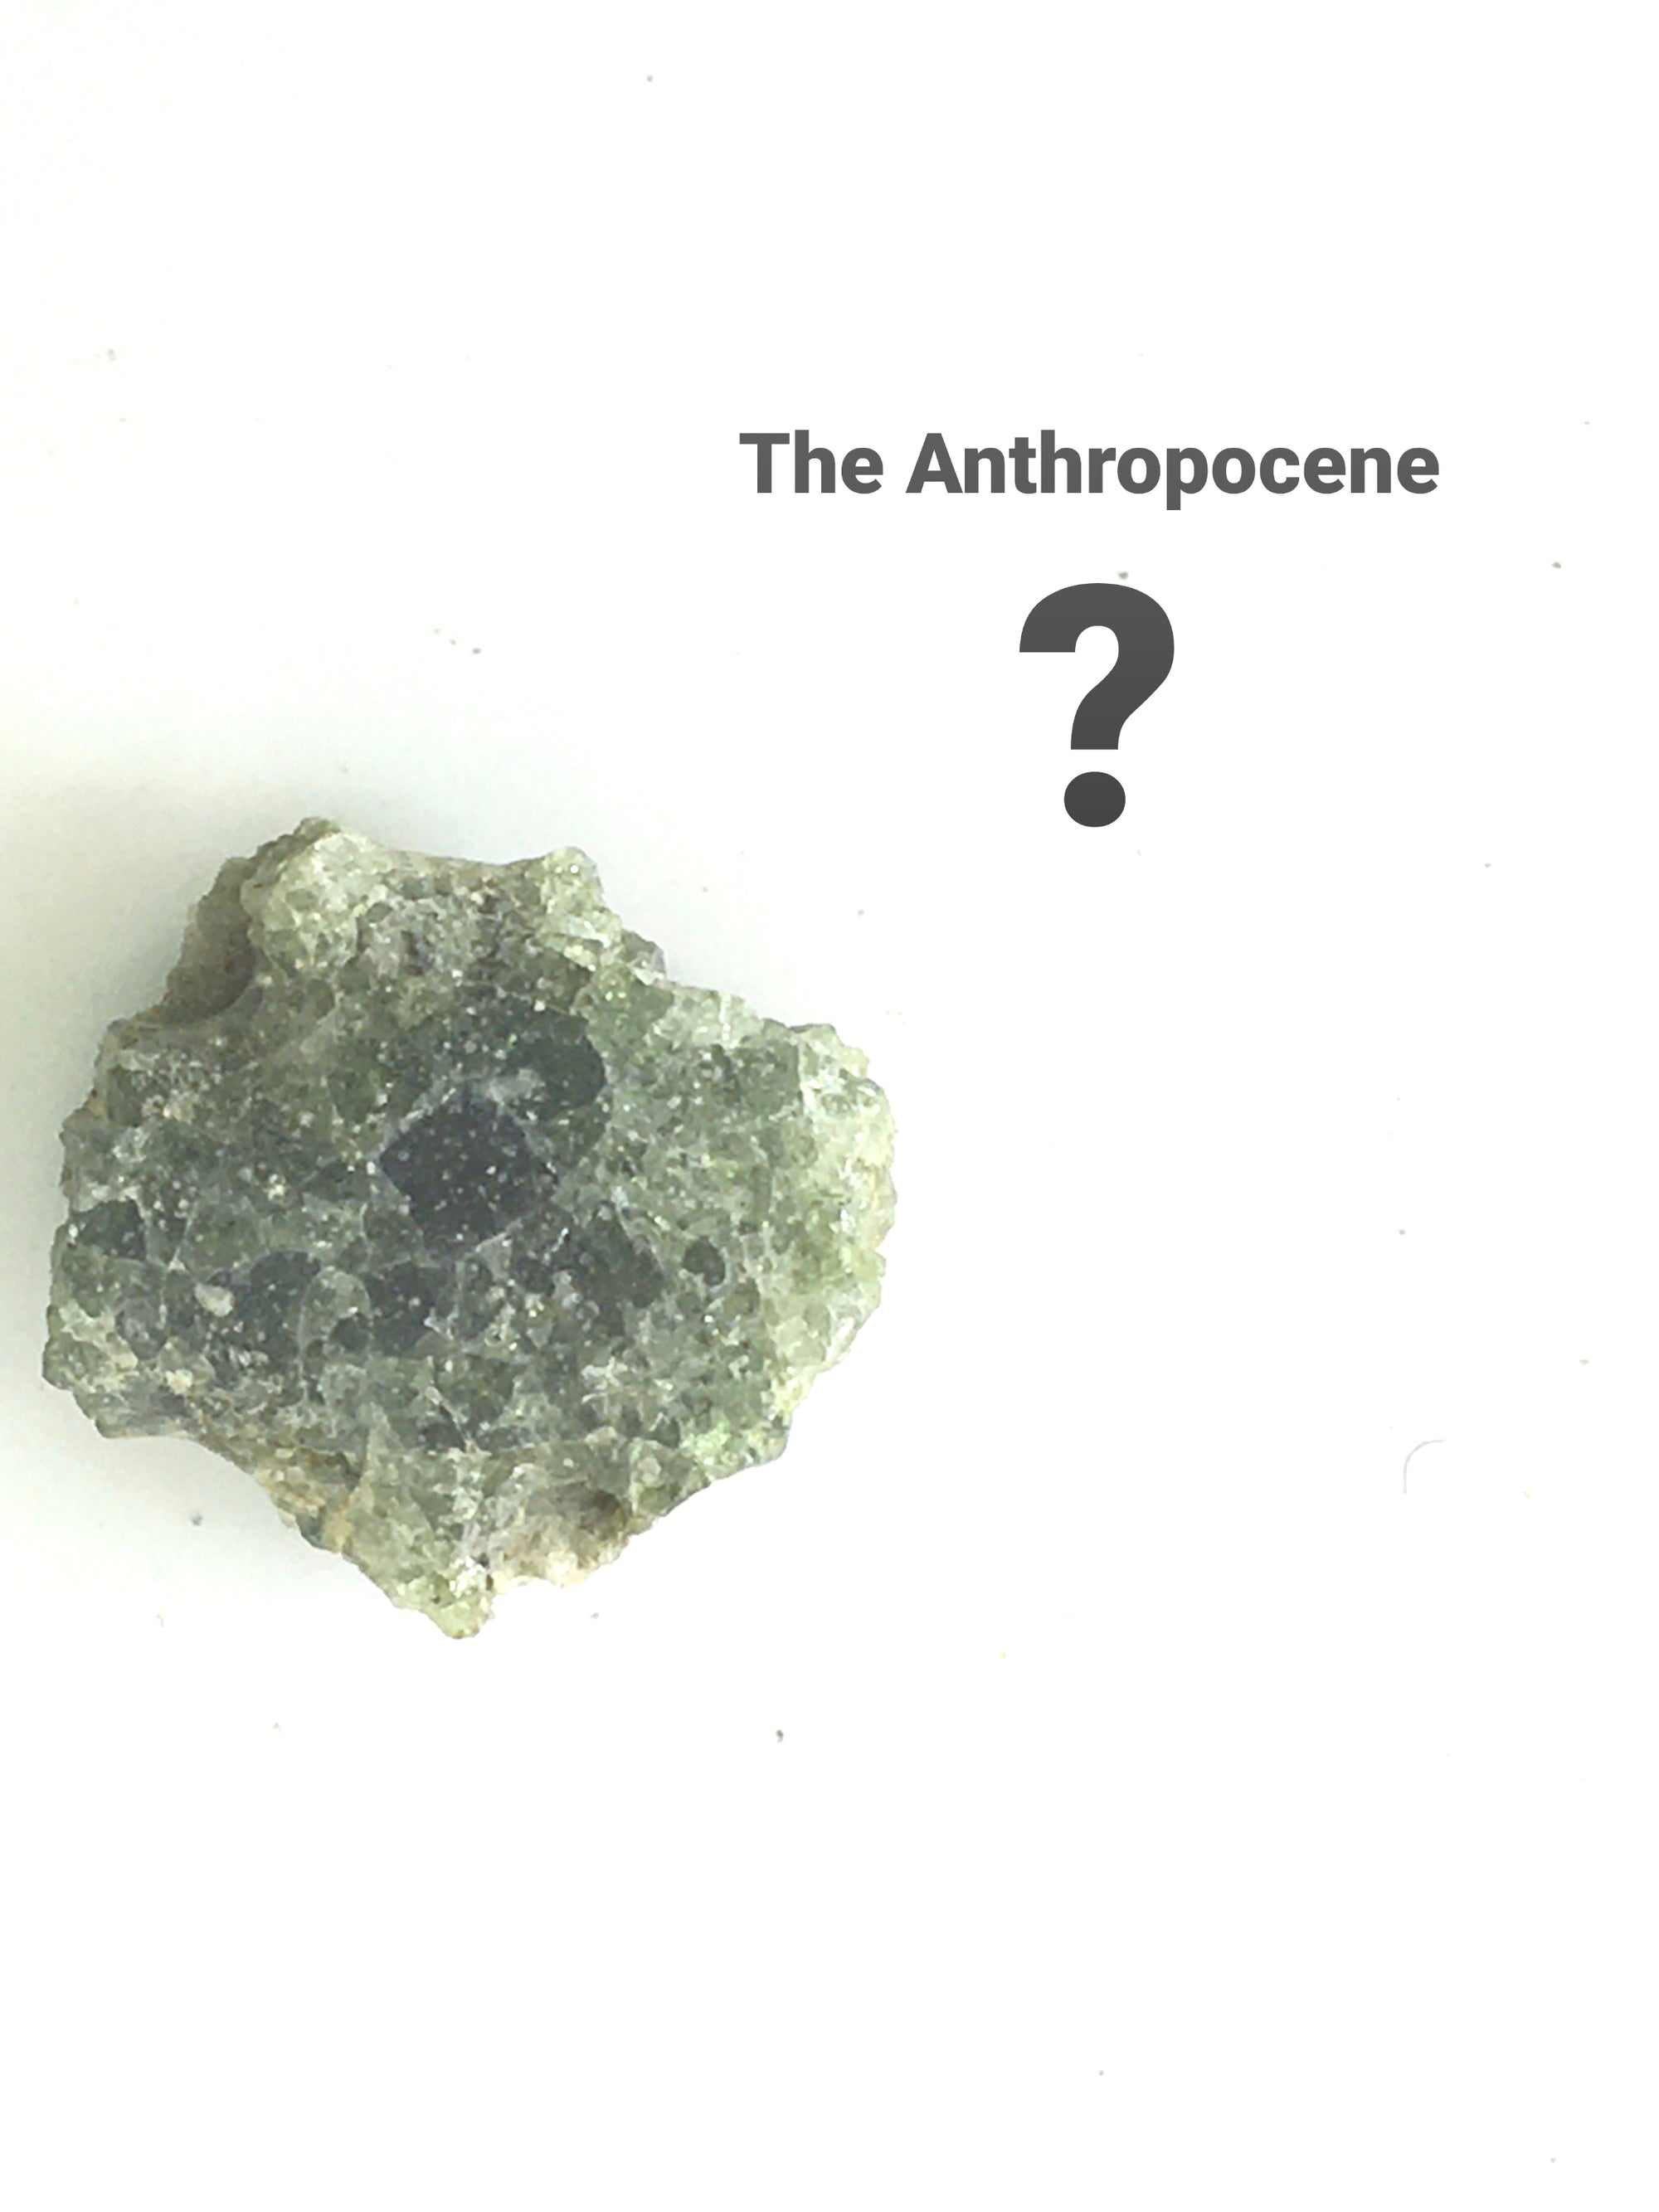 The Anthropocene ... it all started with a big bang!